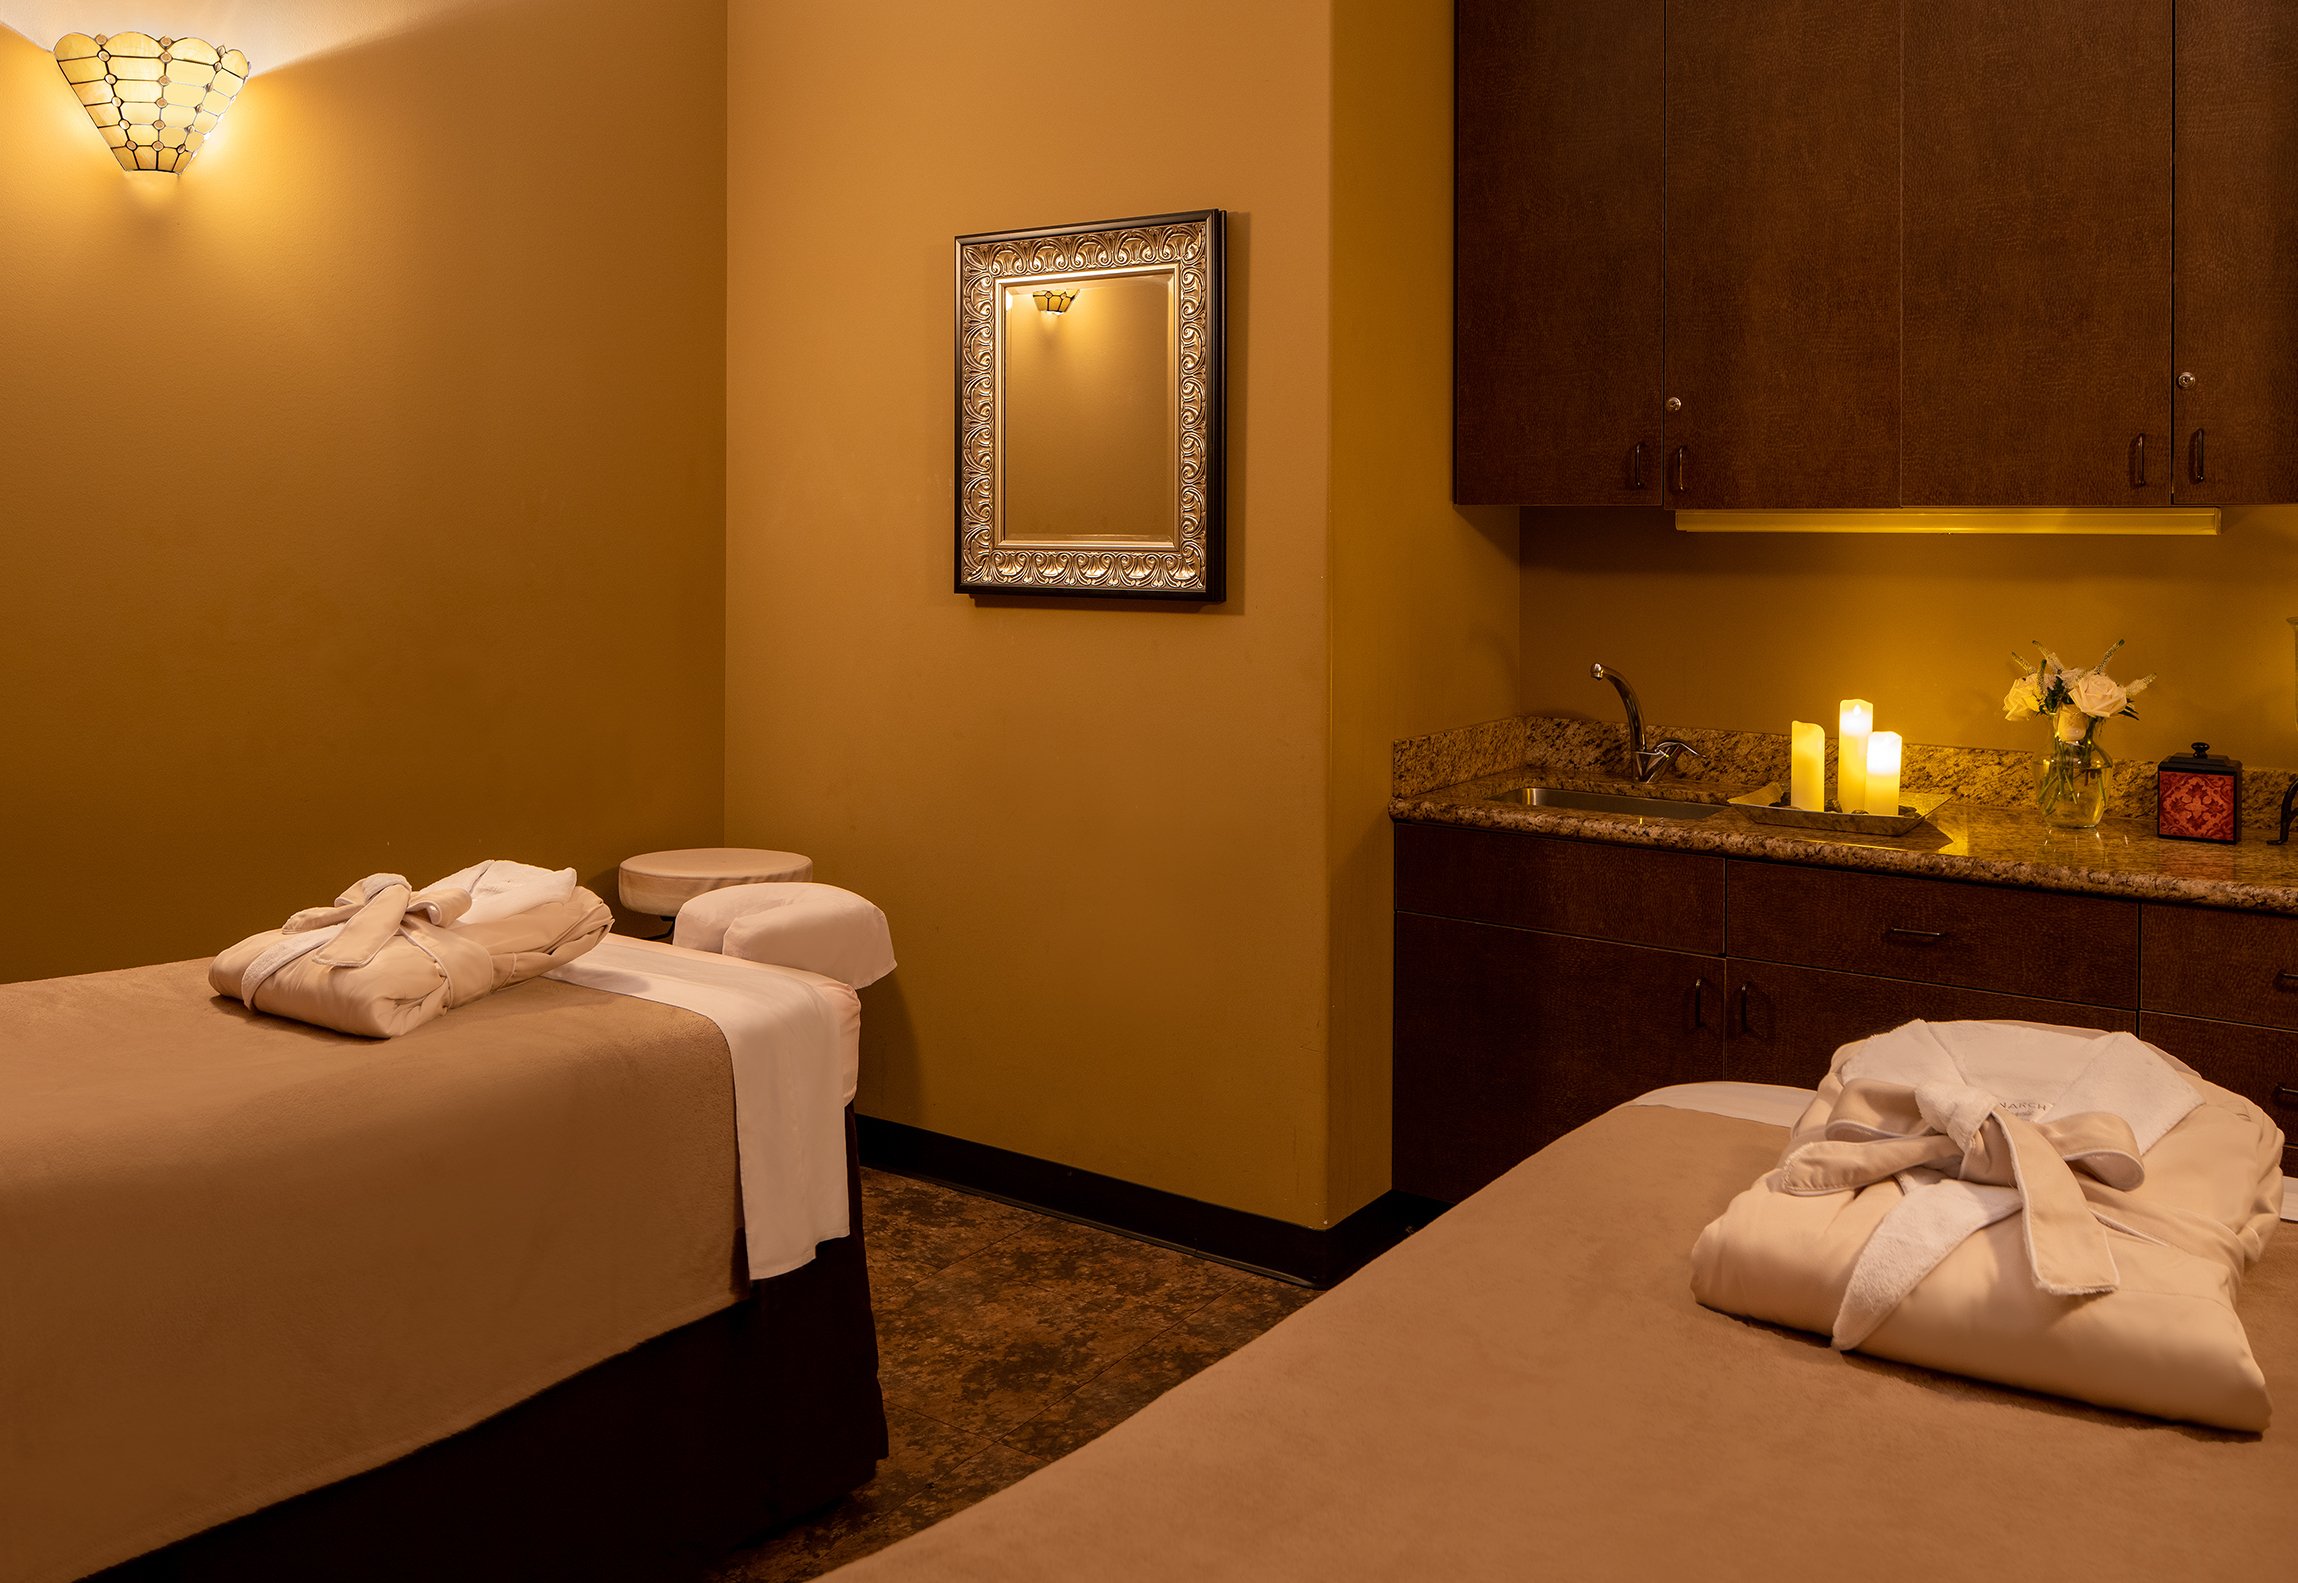 A couples massage room in the hotel's spa at The Woodlands.